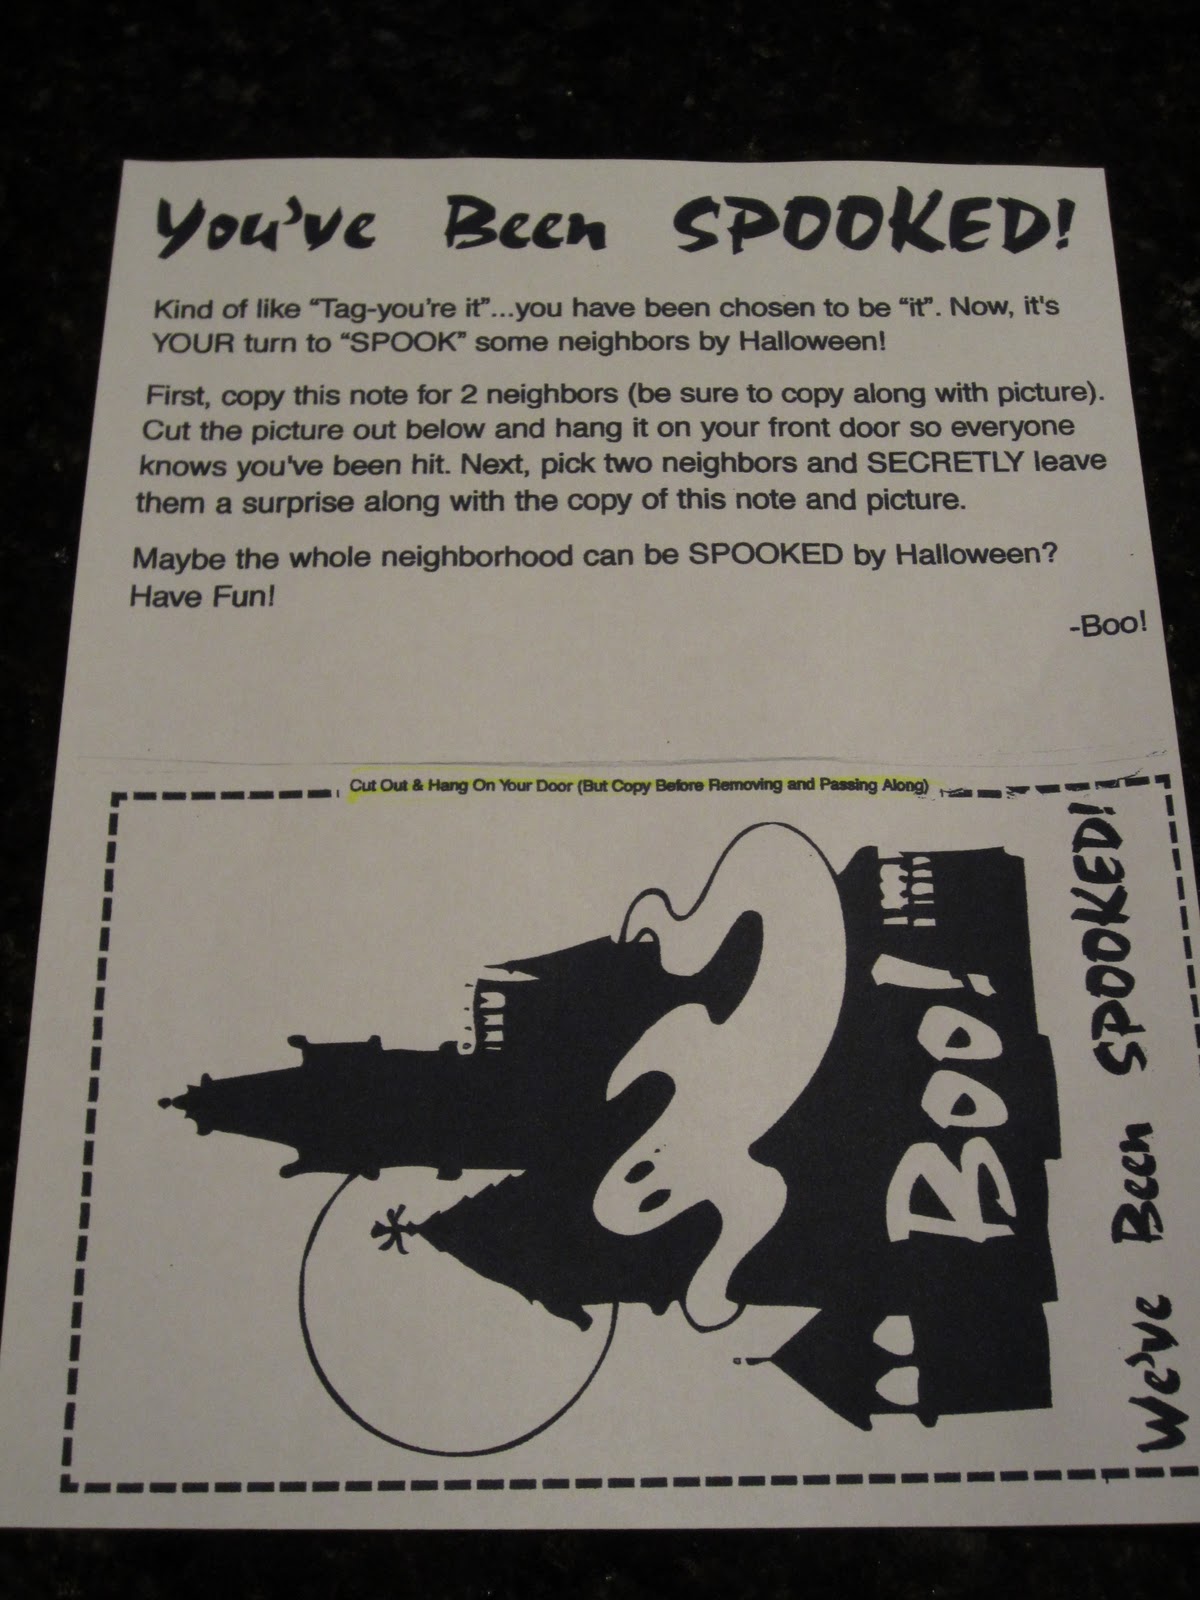 Instructions on how to spook your neighbors